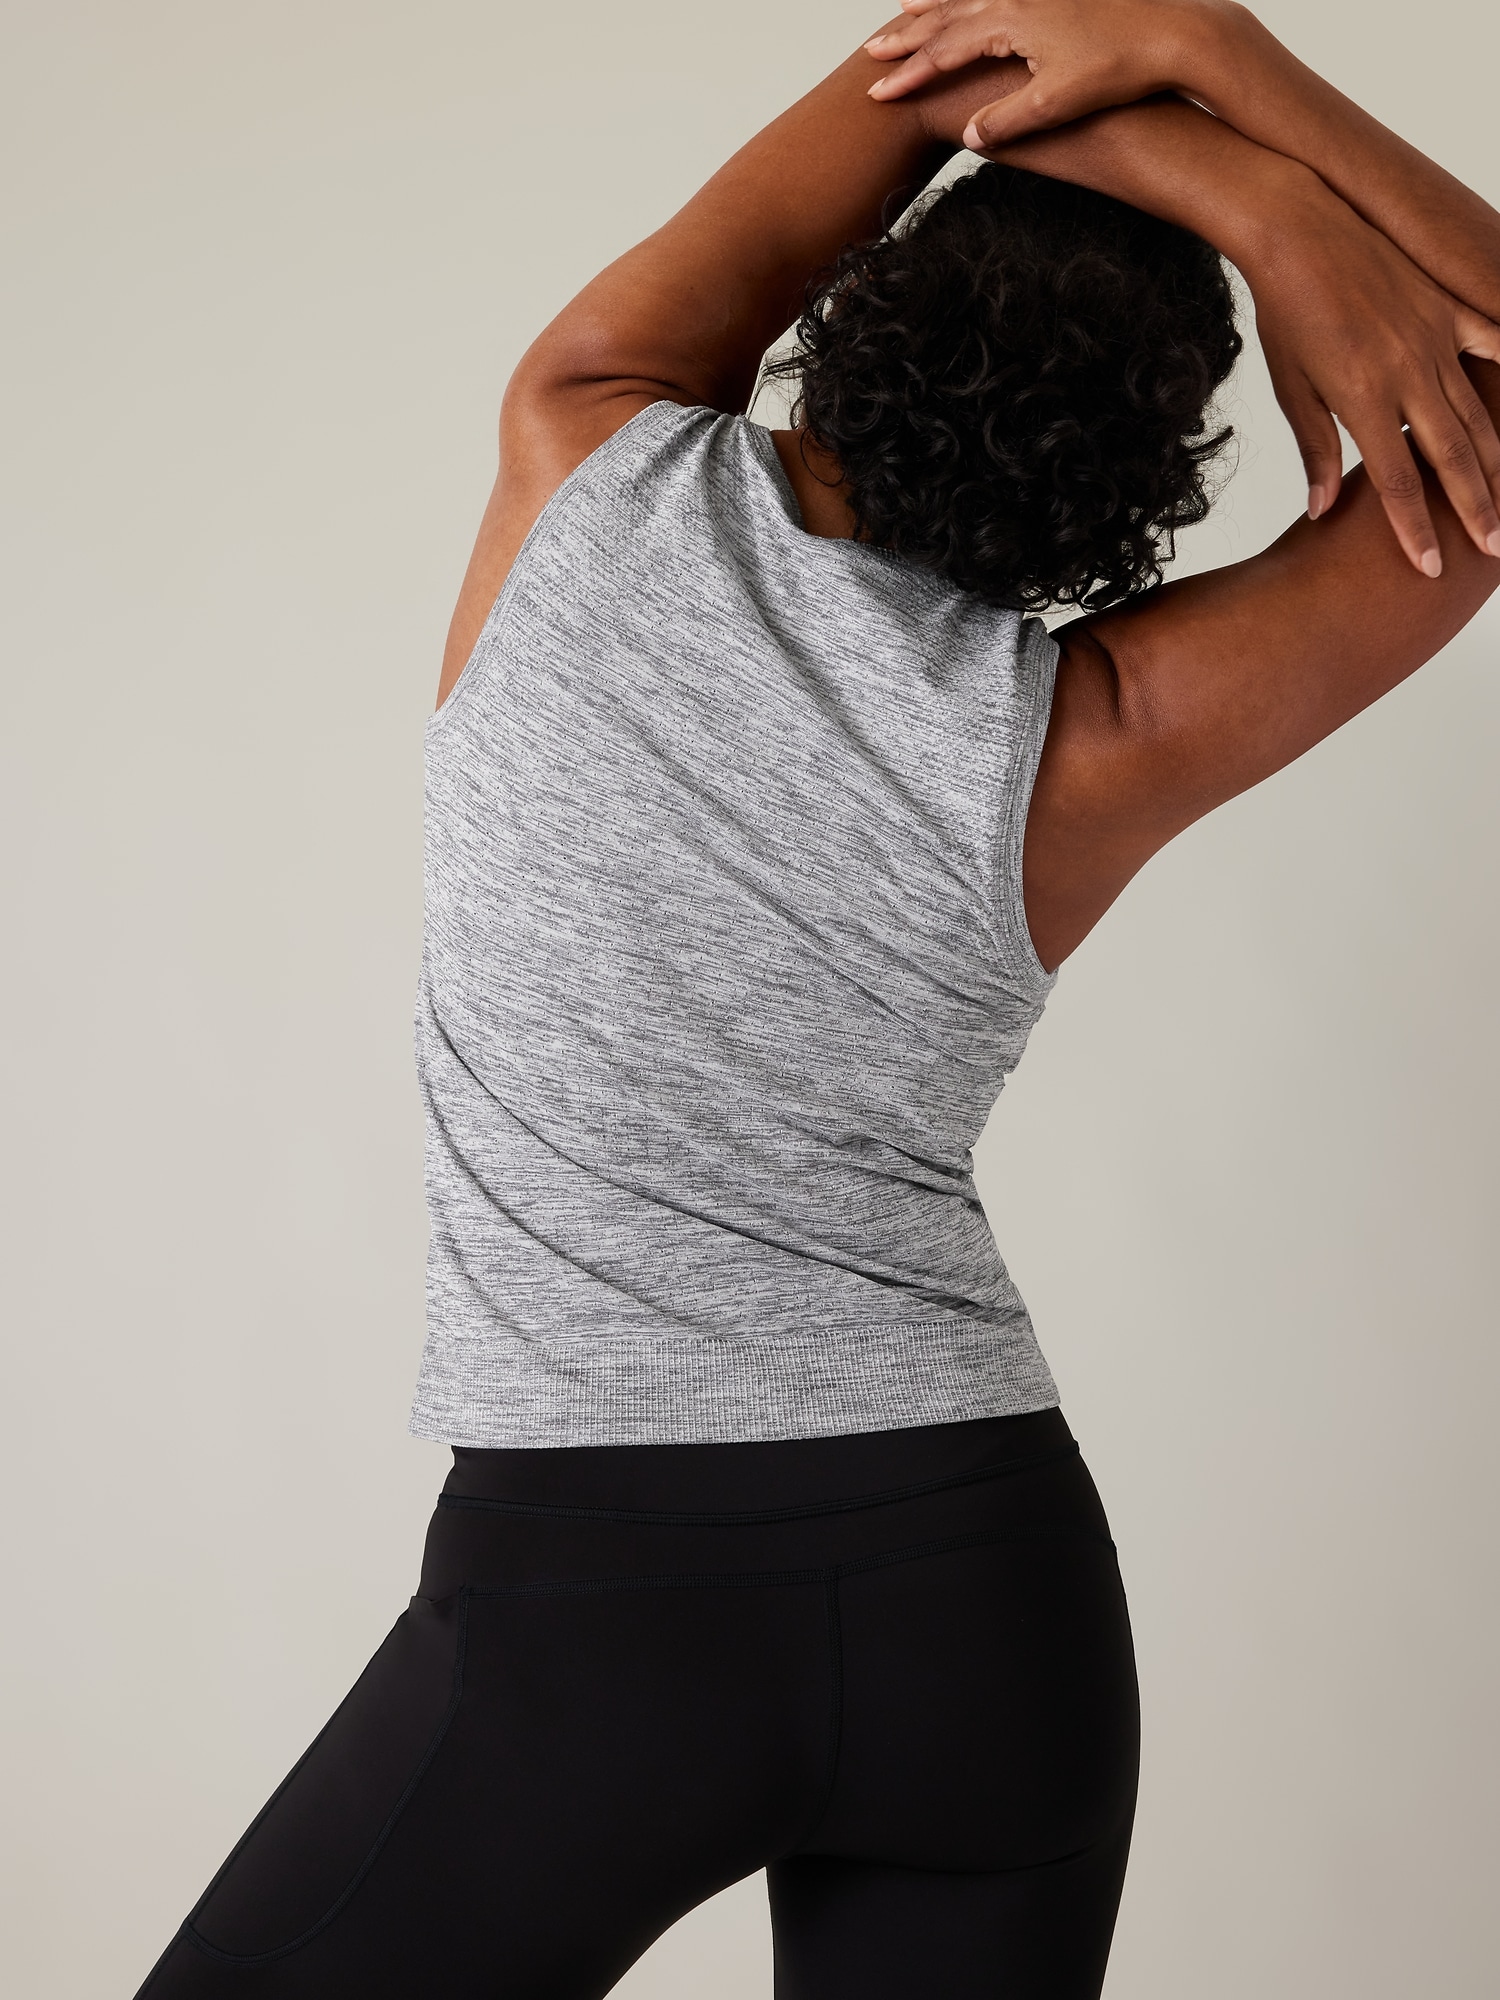 Fit Review Friday! Athleta In Motion Seamless Tank, Effortless Tank and  Semi-Annual Sale Starts Today!